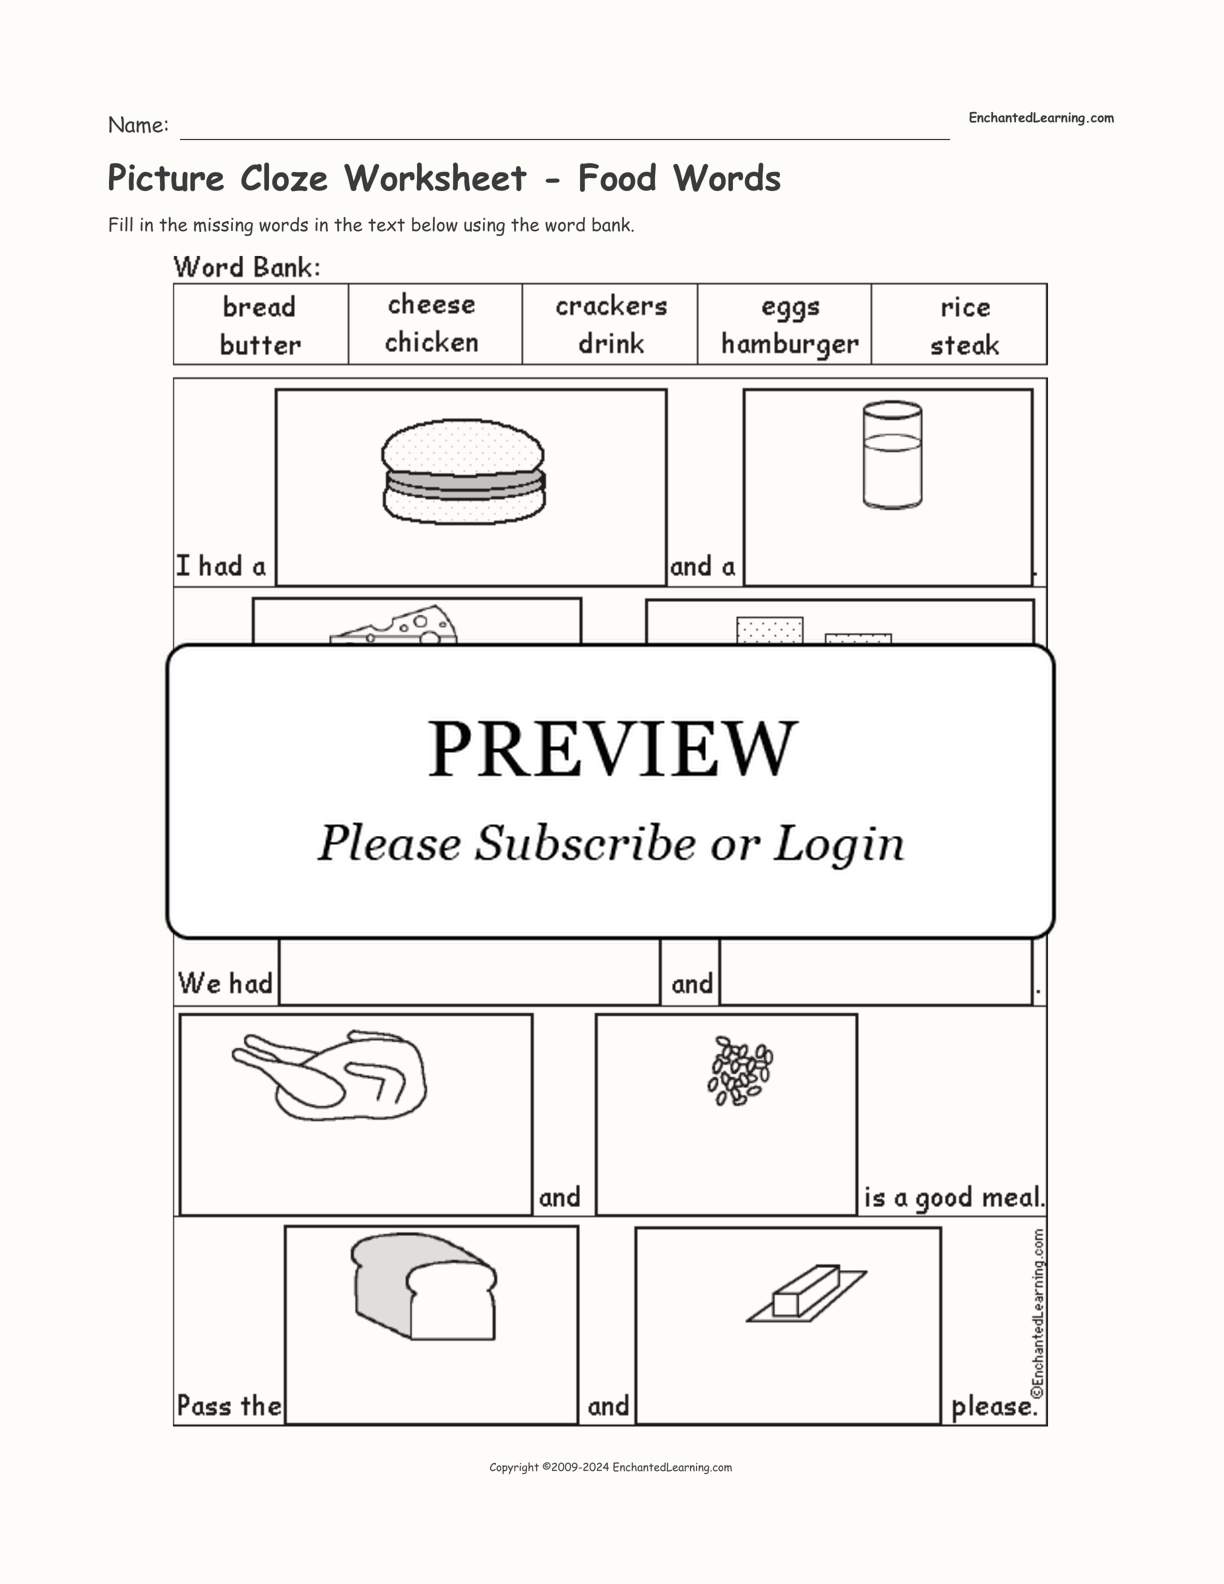 Picture Cloze Worksheet - Food Words interactive worksheet page 1